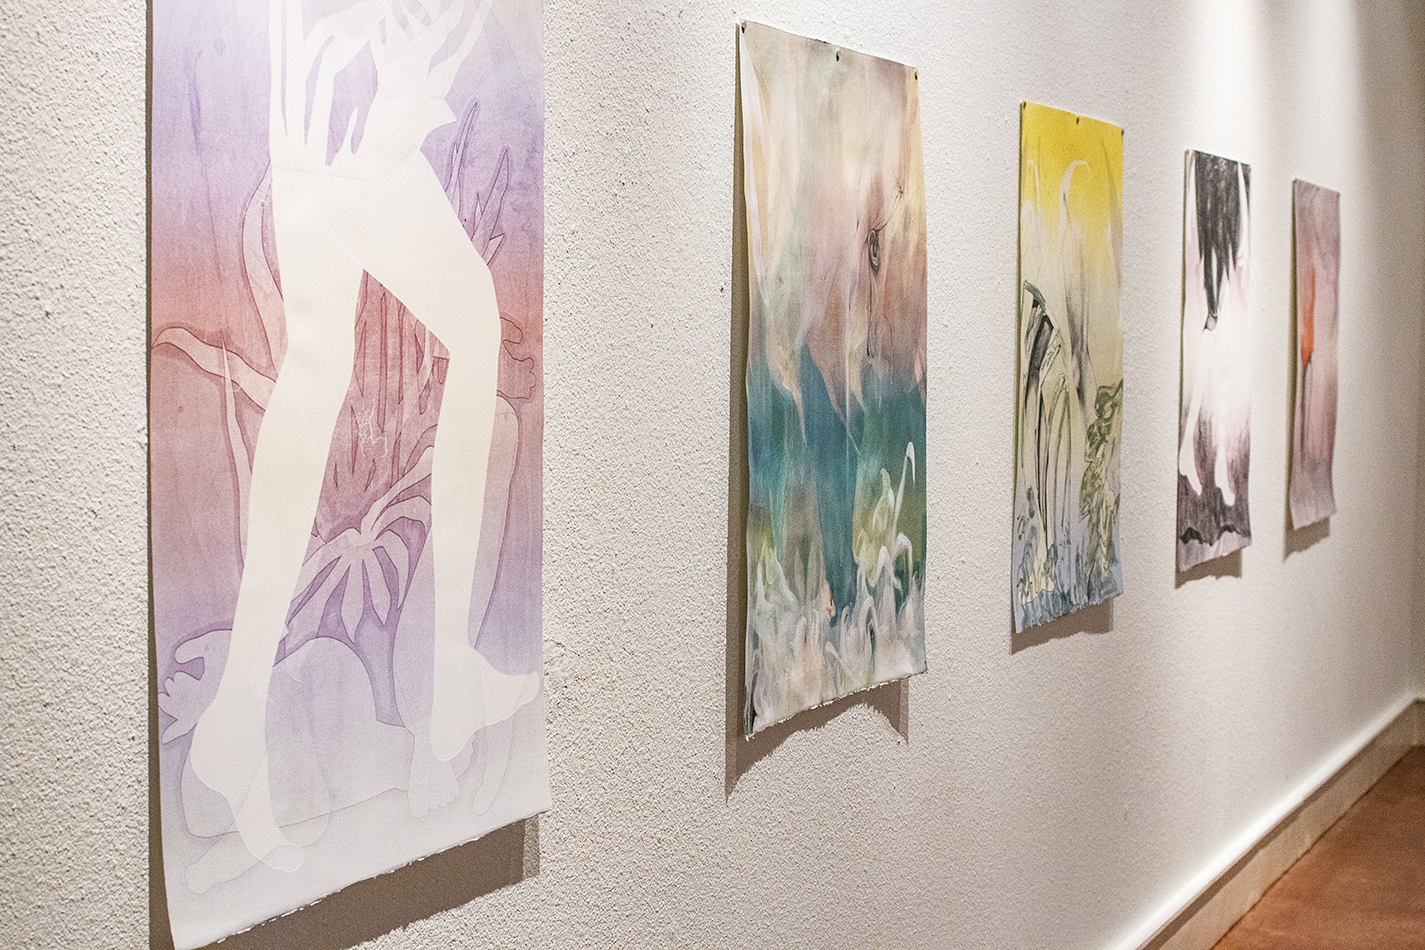 Work by Jessi Barnes is on display in South’s Carillon Gallery during regular gallery hours through Sept. 27. The exhibit also features prints created by South fine arts students.